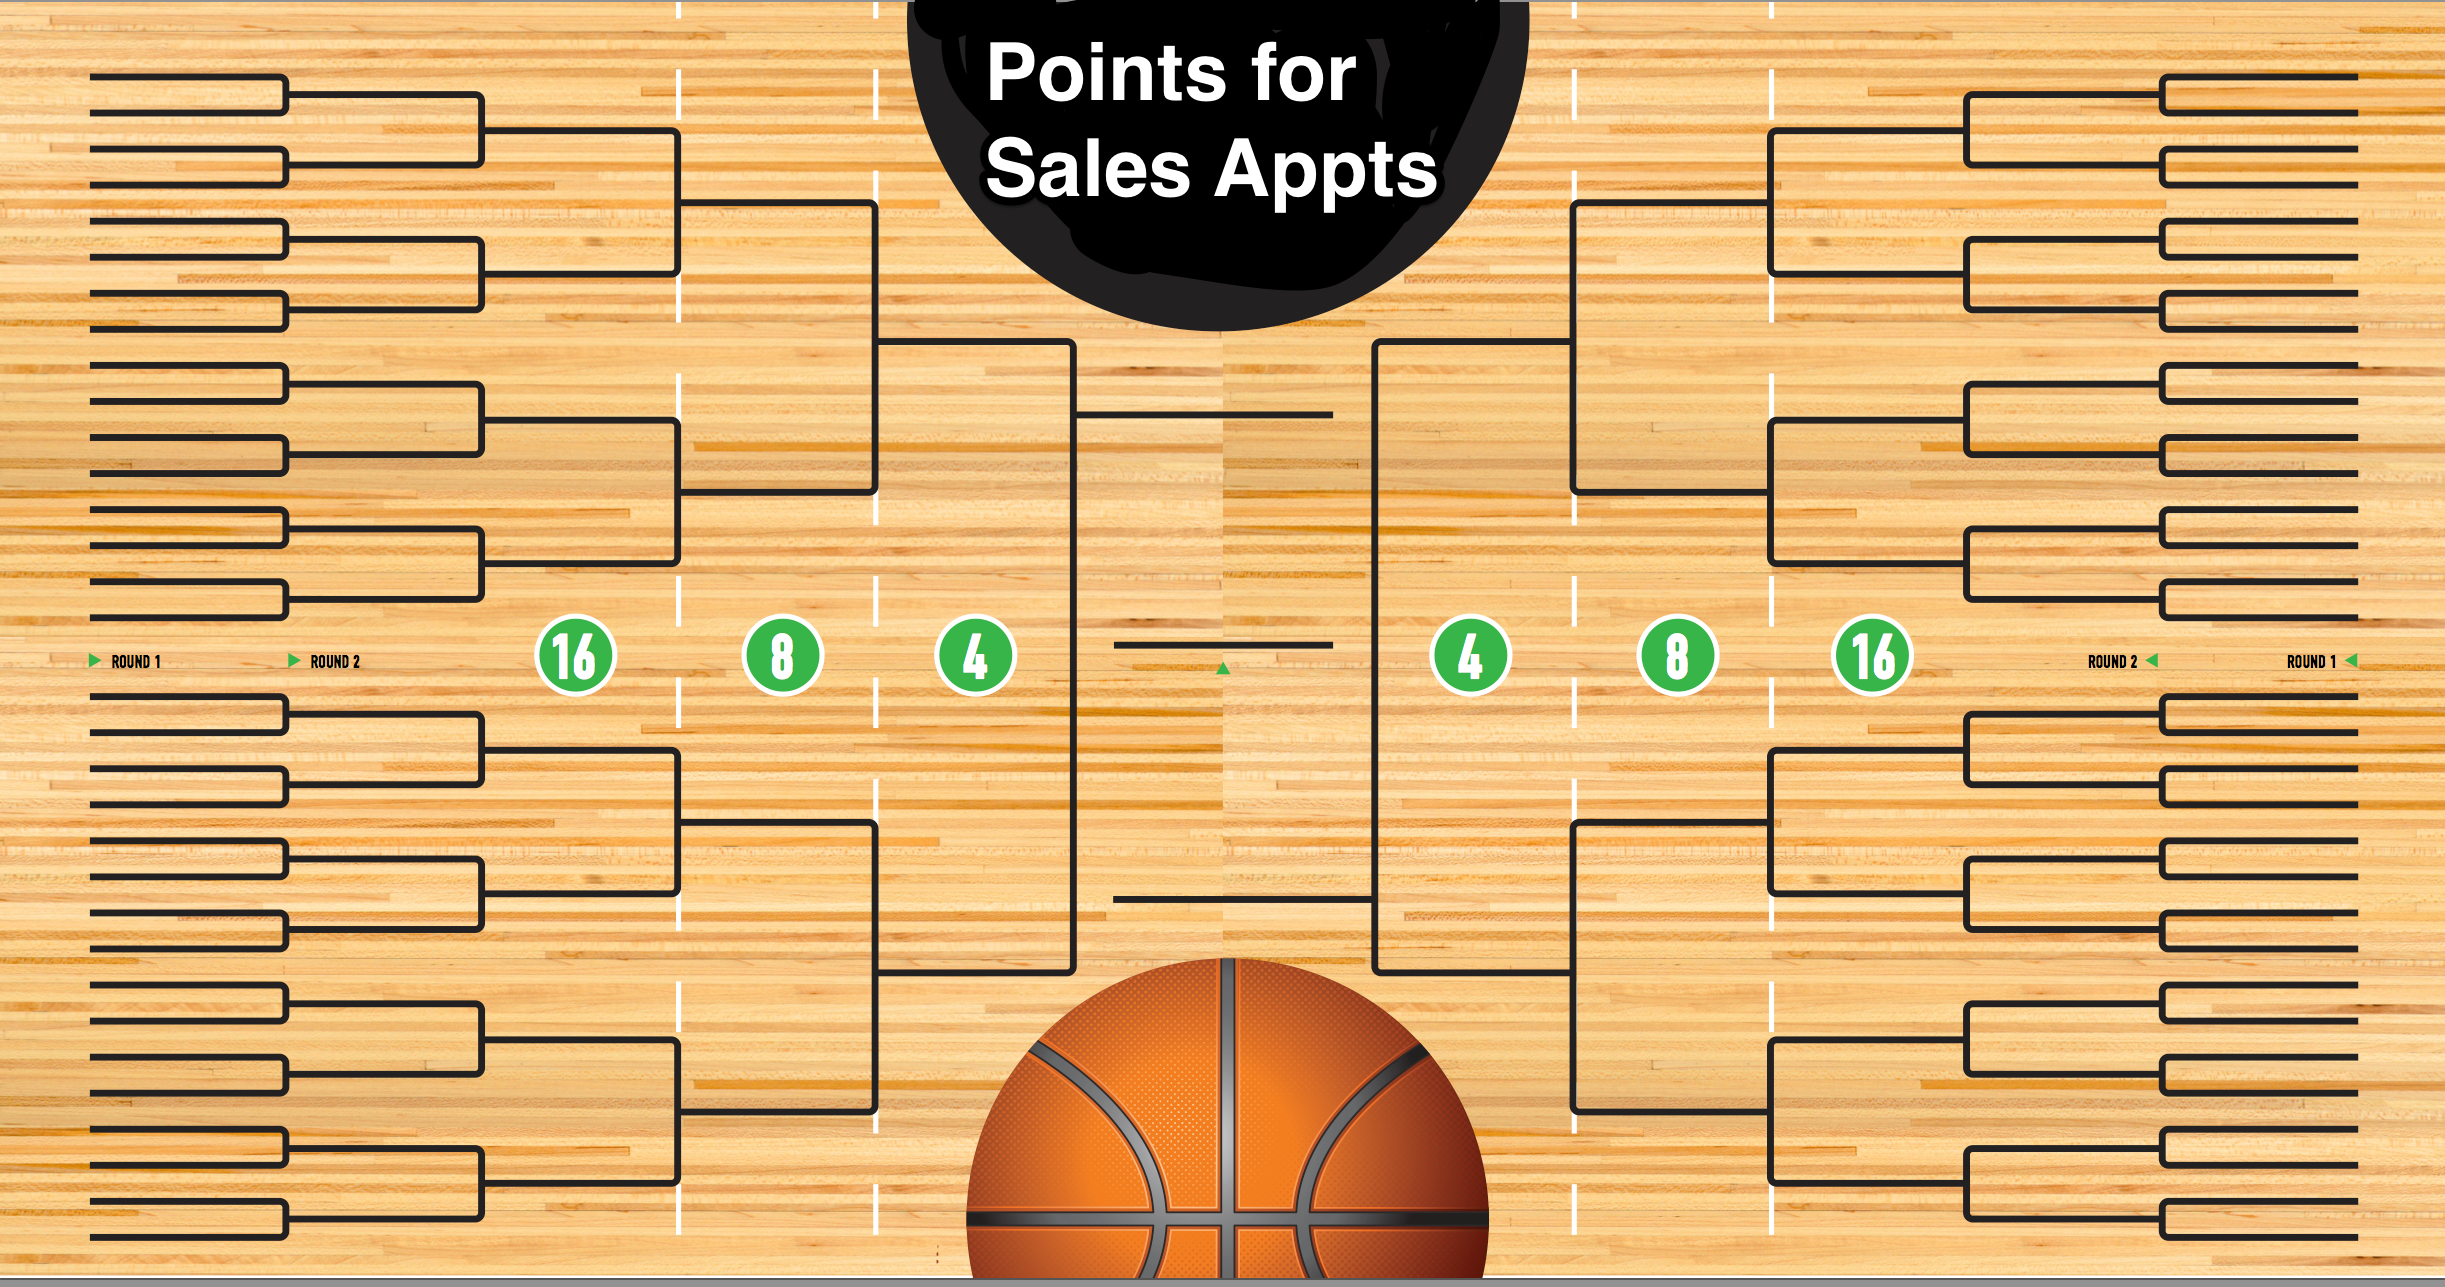 35% More Sales Appointments, Thanks to March Madness